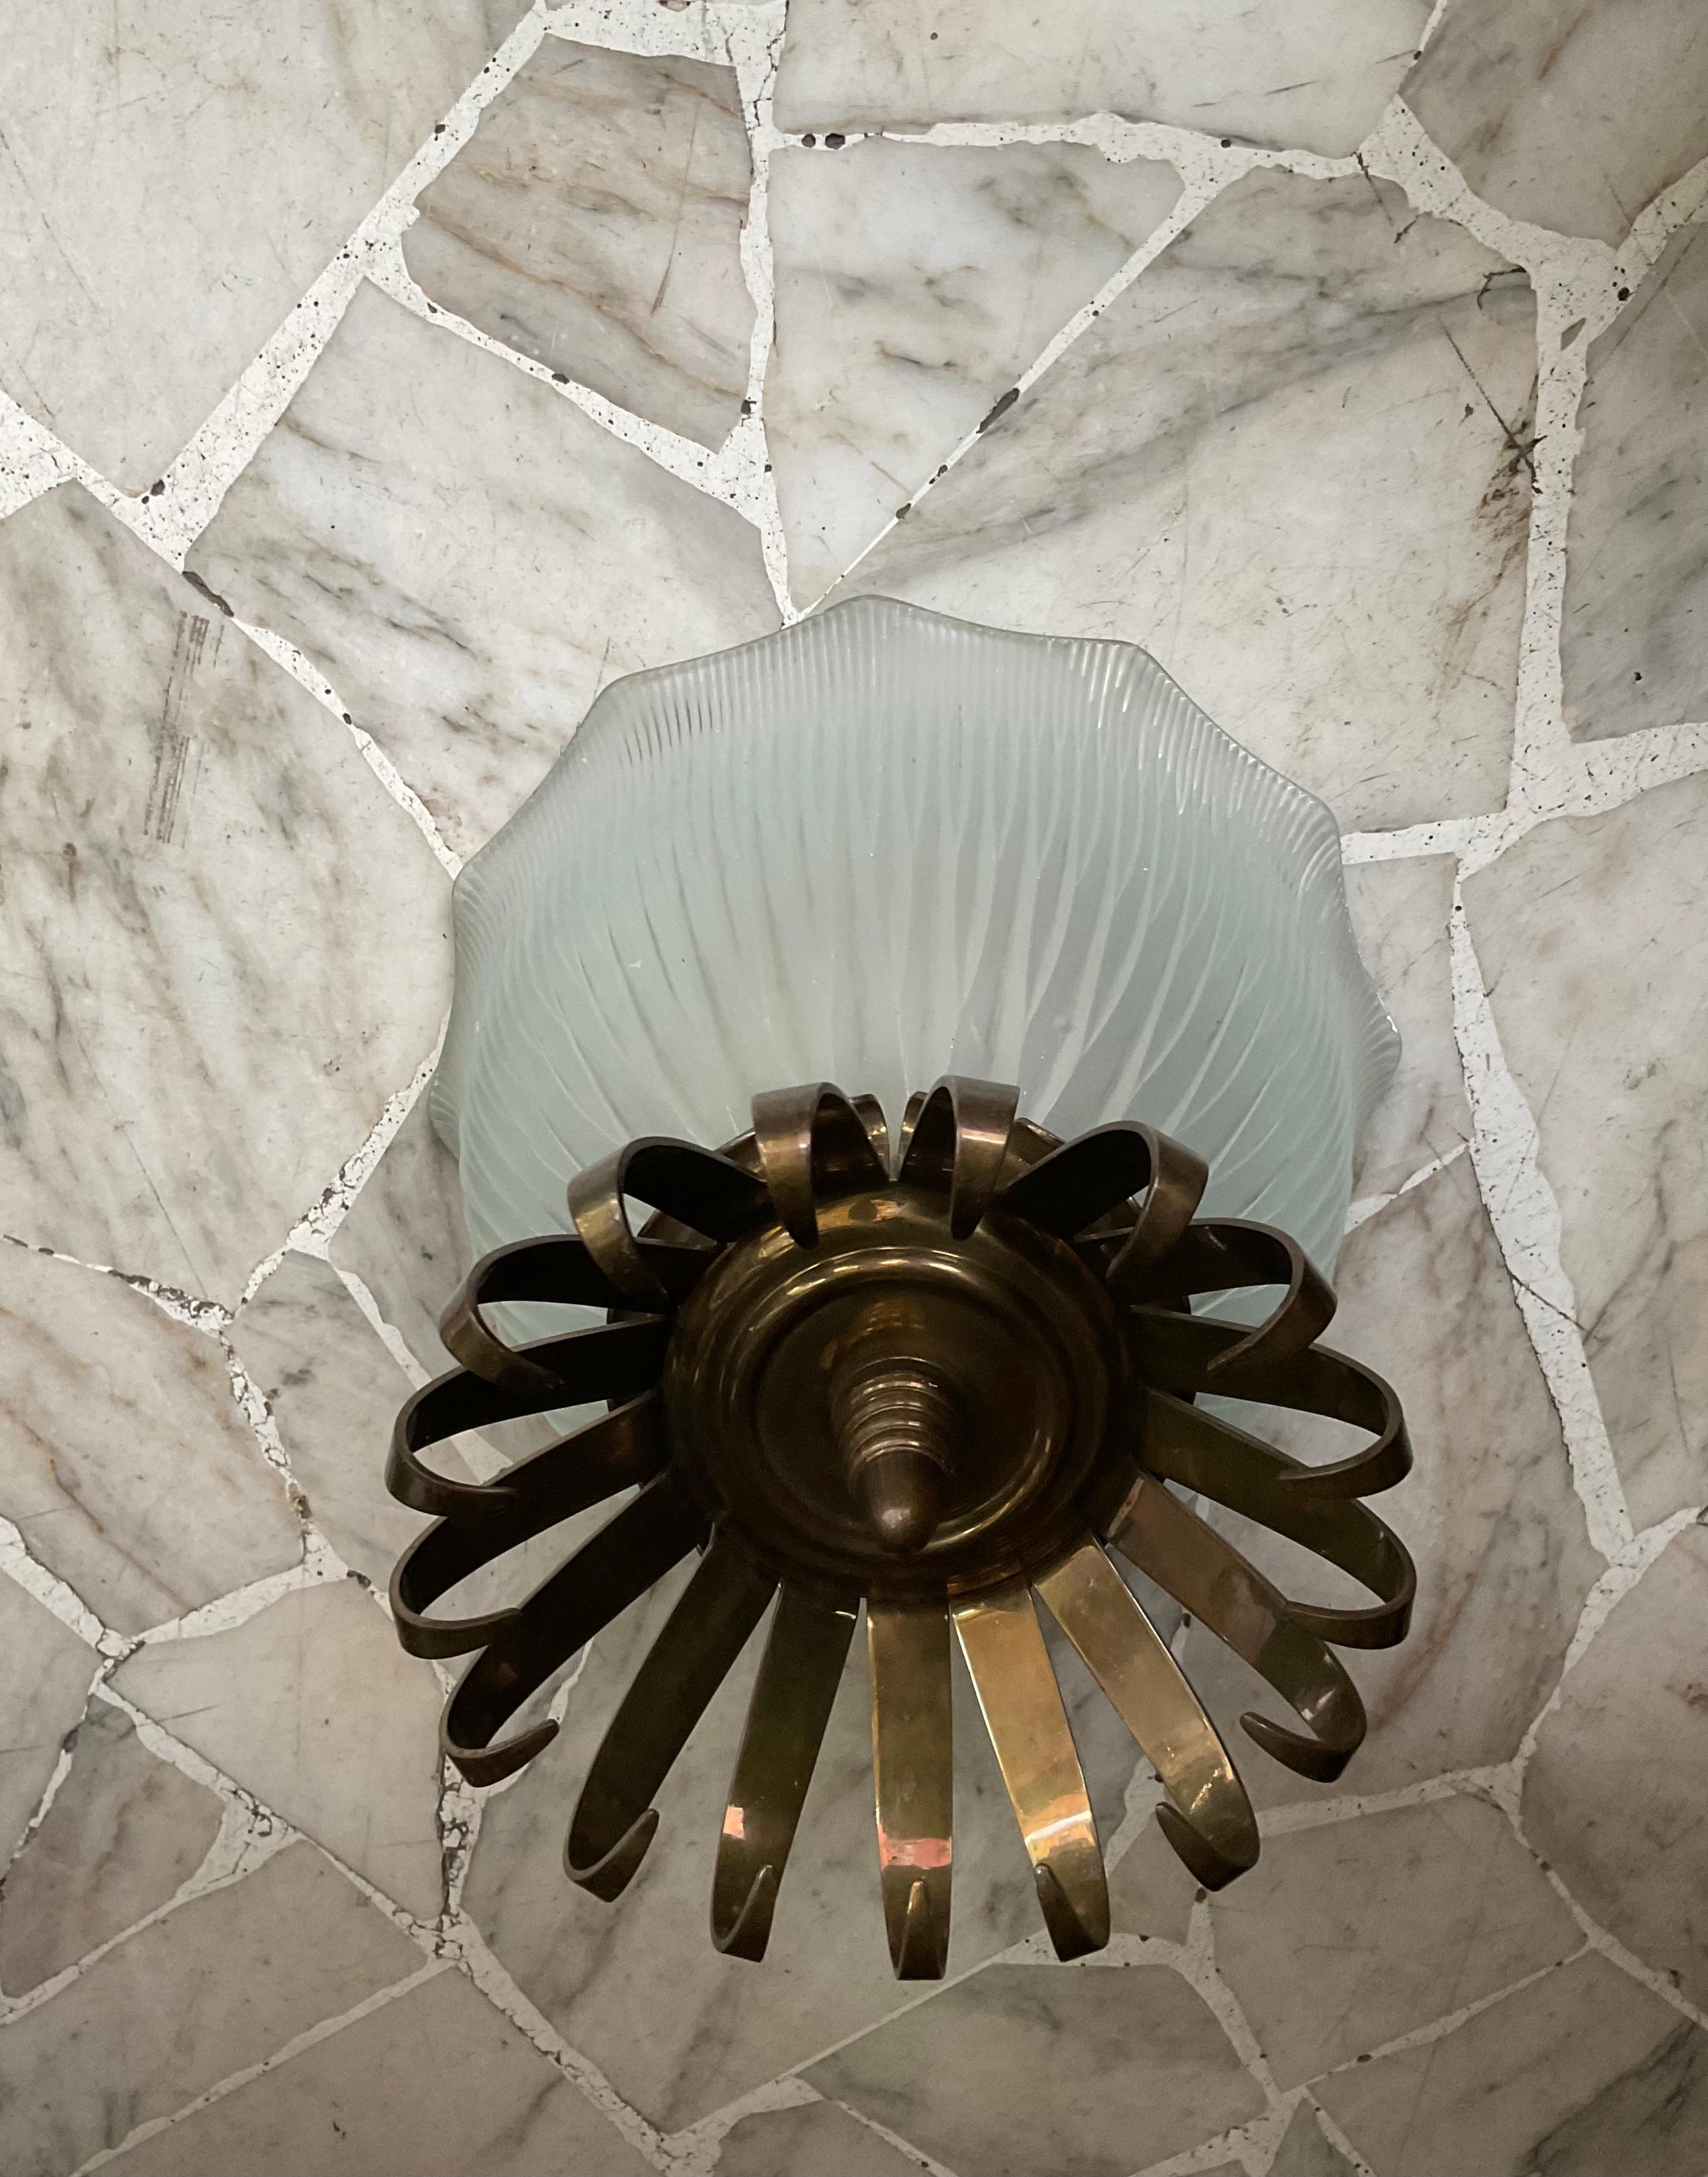 A rare ceiling light of excellent quality the metal is a fusion of bronze and brass and the glass is molded.
For quality and elegant design we can attribute this ceiling light to BBPR studio,
consisting of the Italian architects, Gian Luigi Banfi,